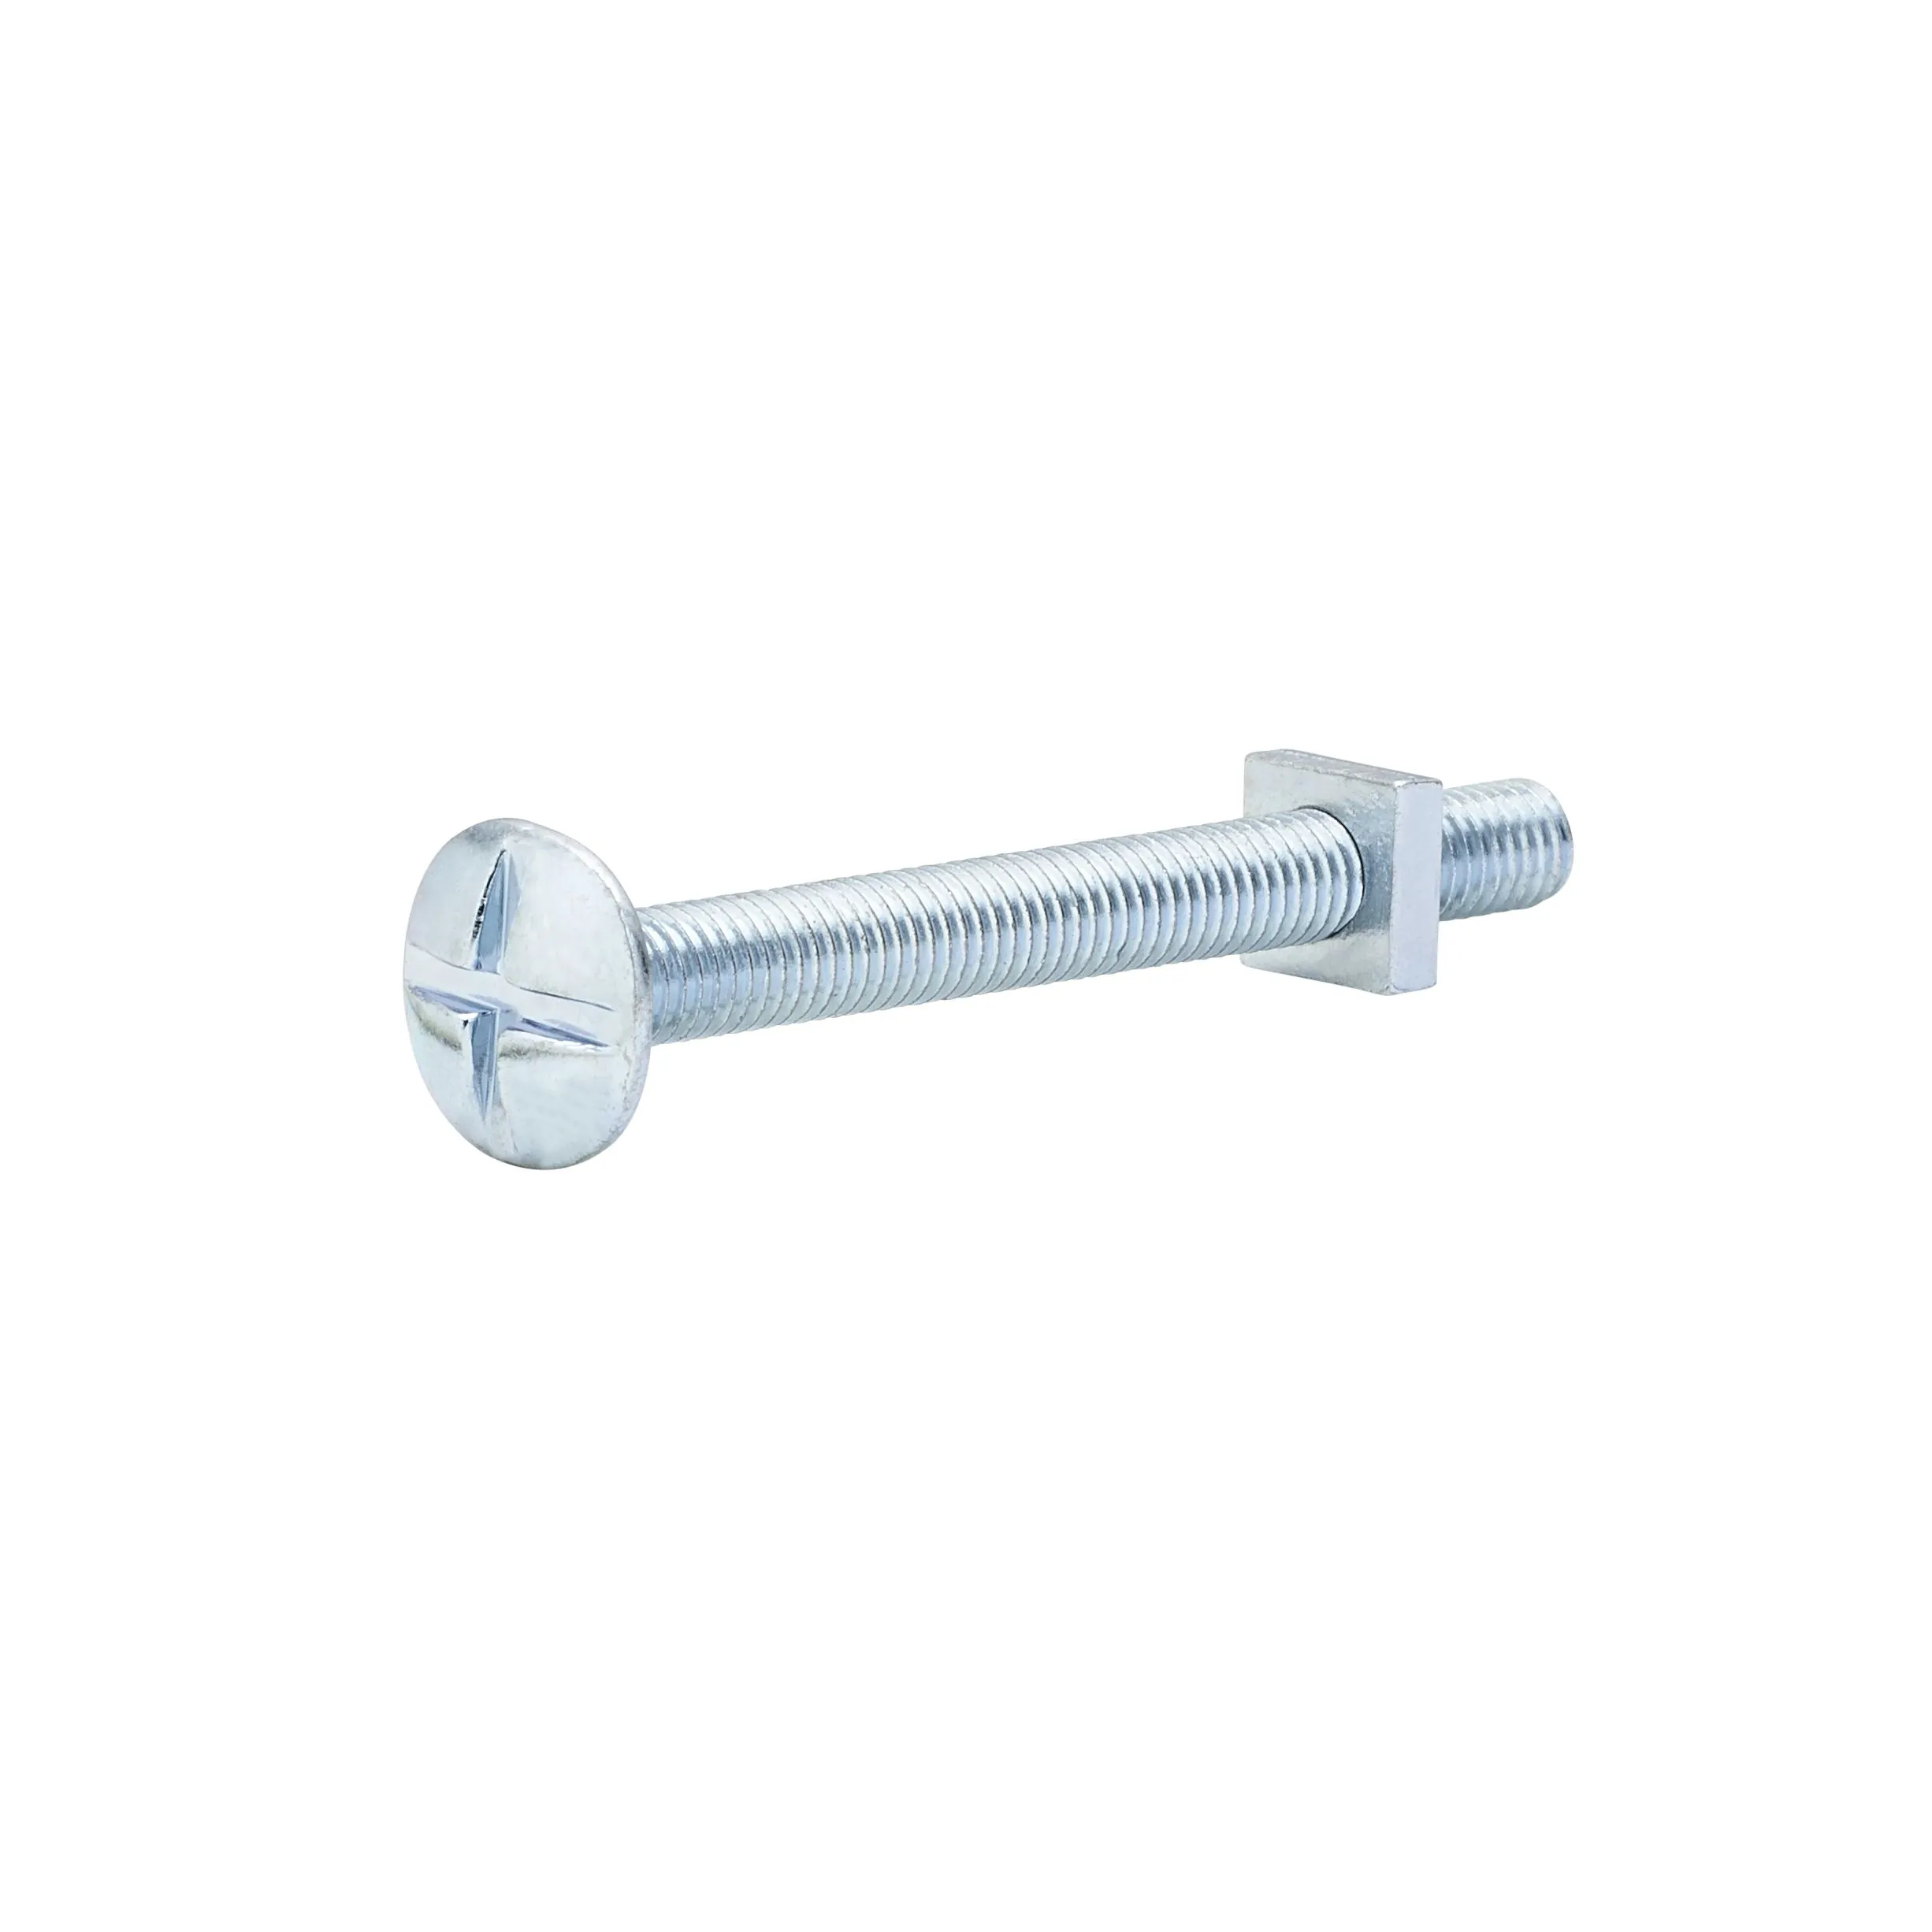 M5 Roofing bolt & nut (L)50mm, Pack of 10